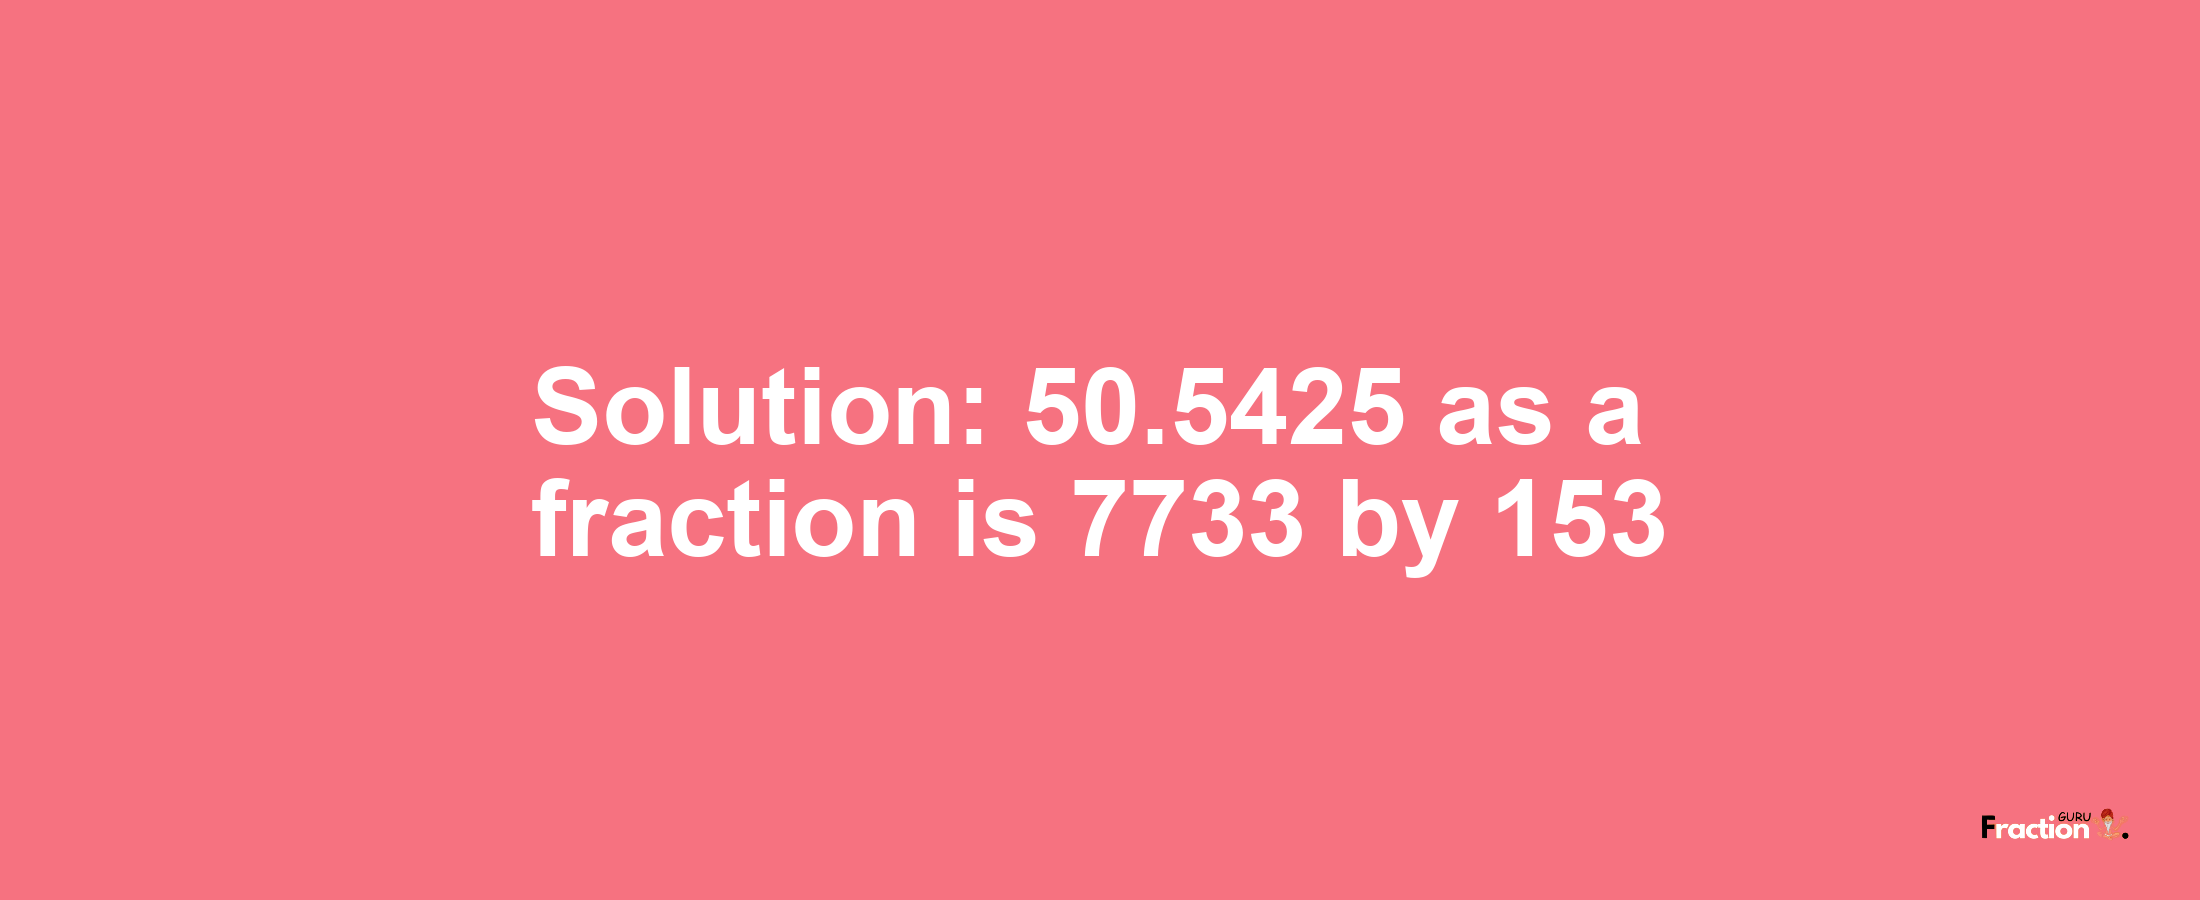 Solution:50.5425 as a fraction is 7733/153